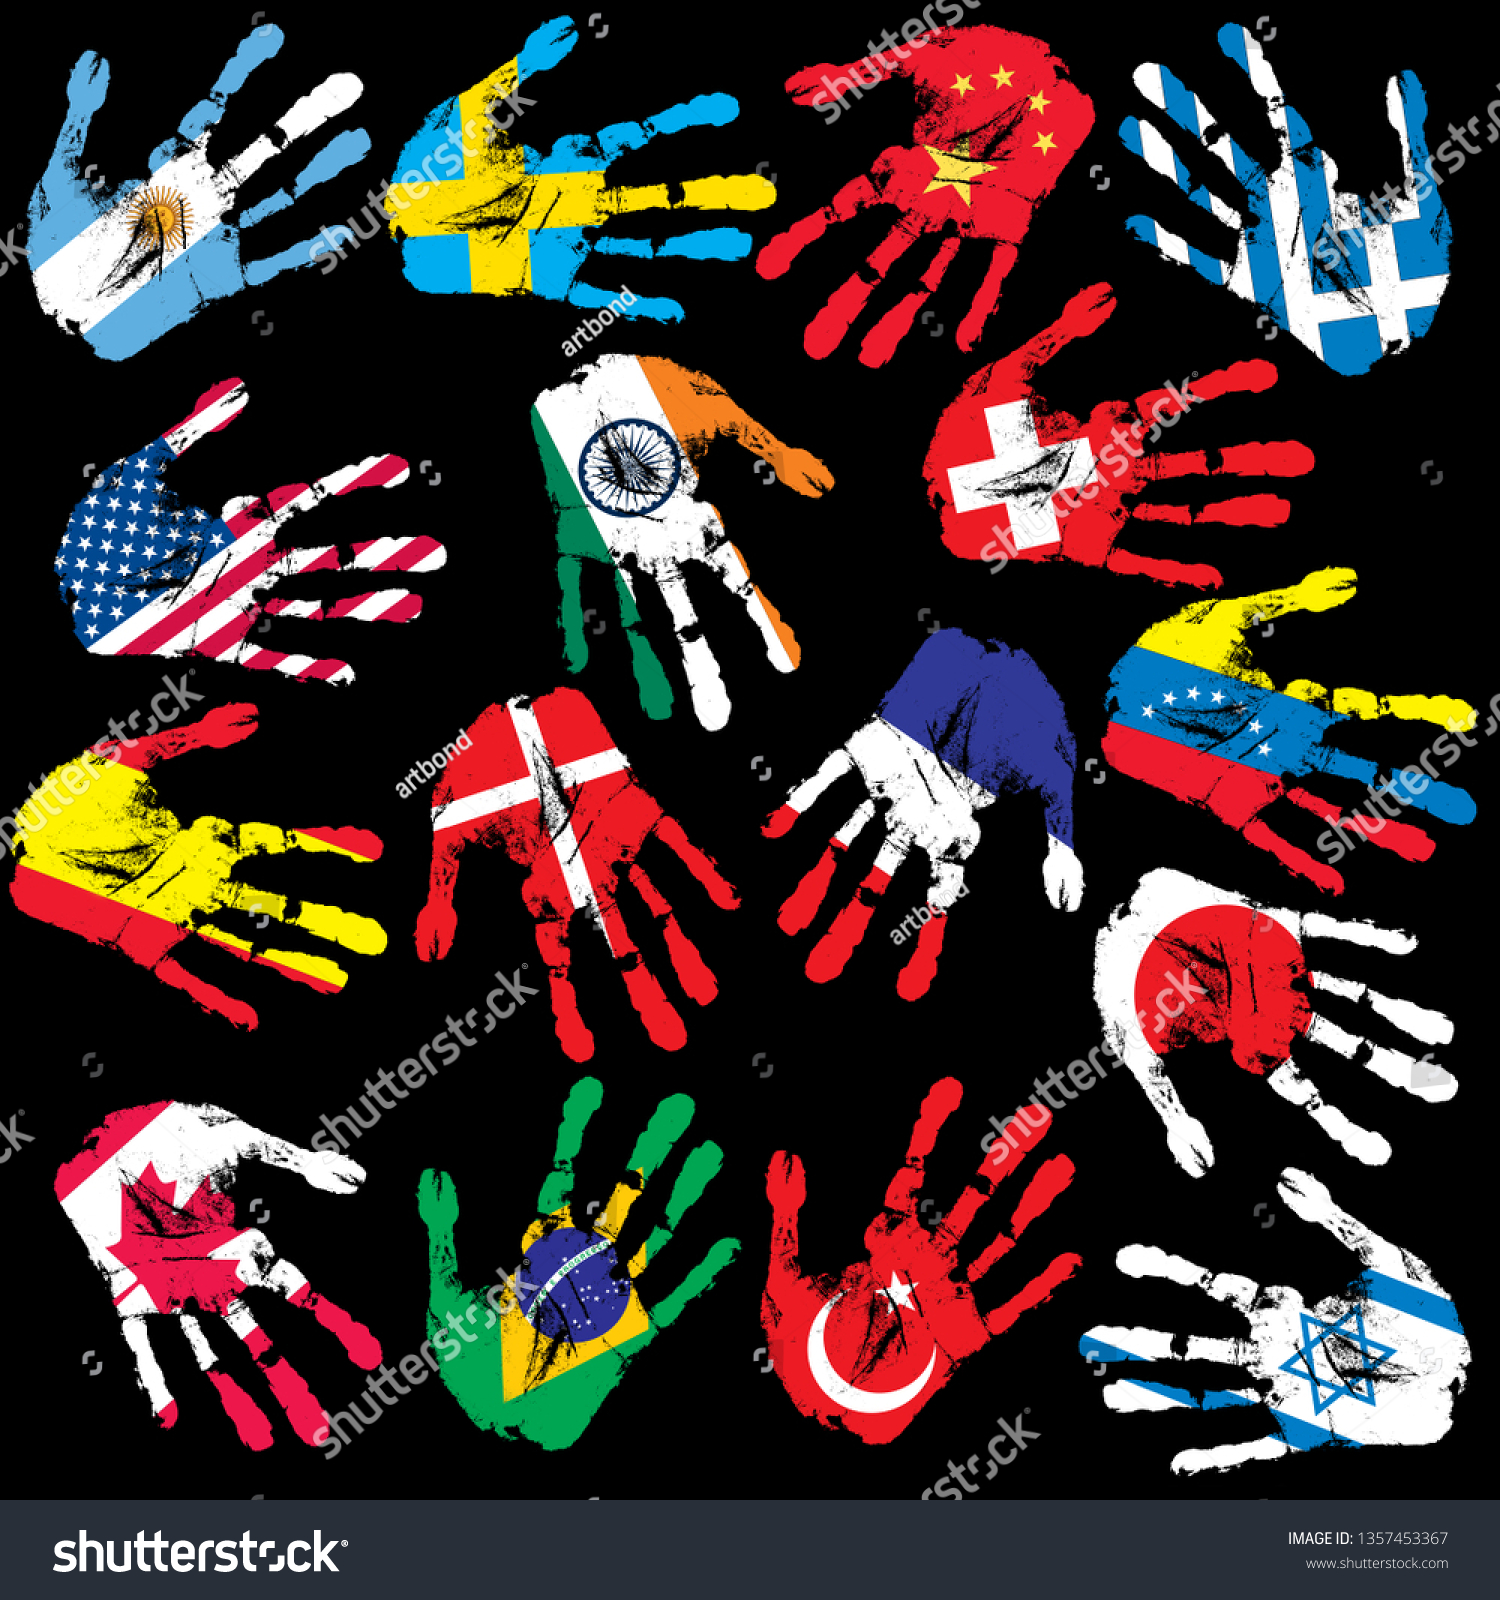 Handprint Image Flags Different Countries Stock Illustration 1357453367 Shutterstock 8037